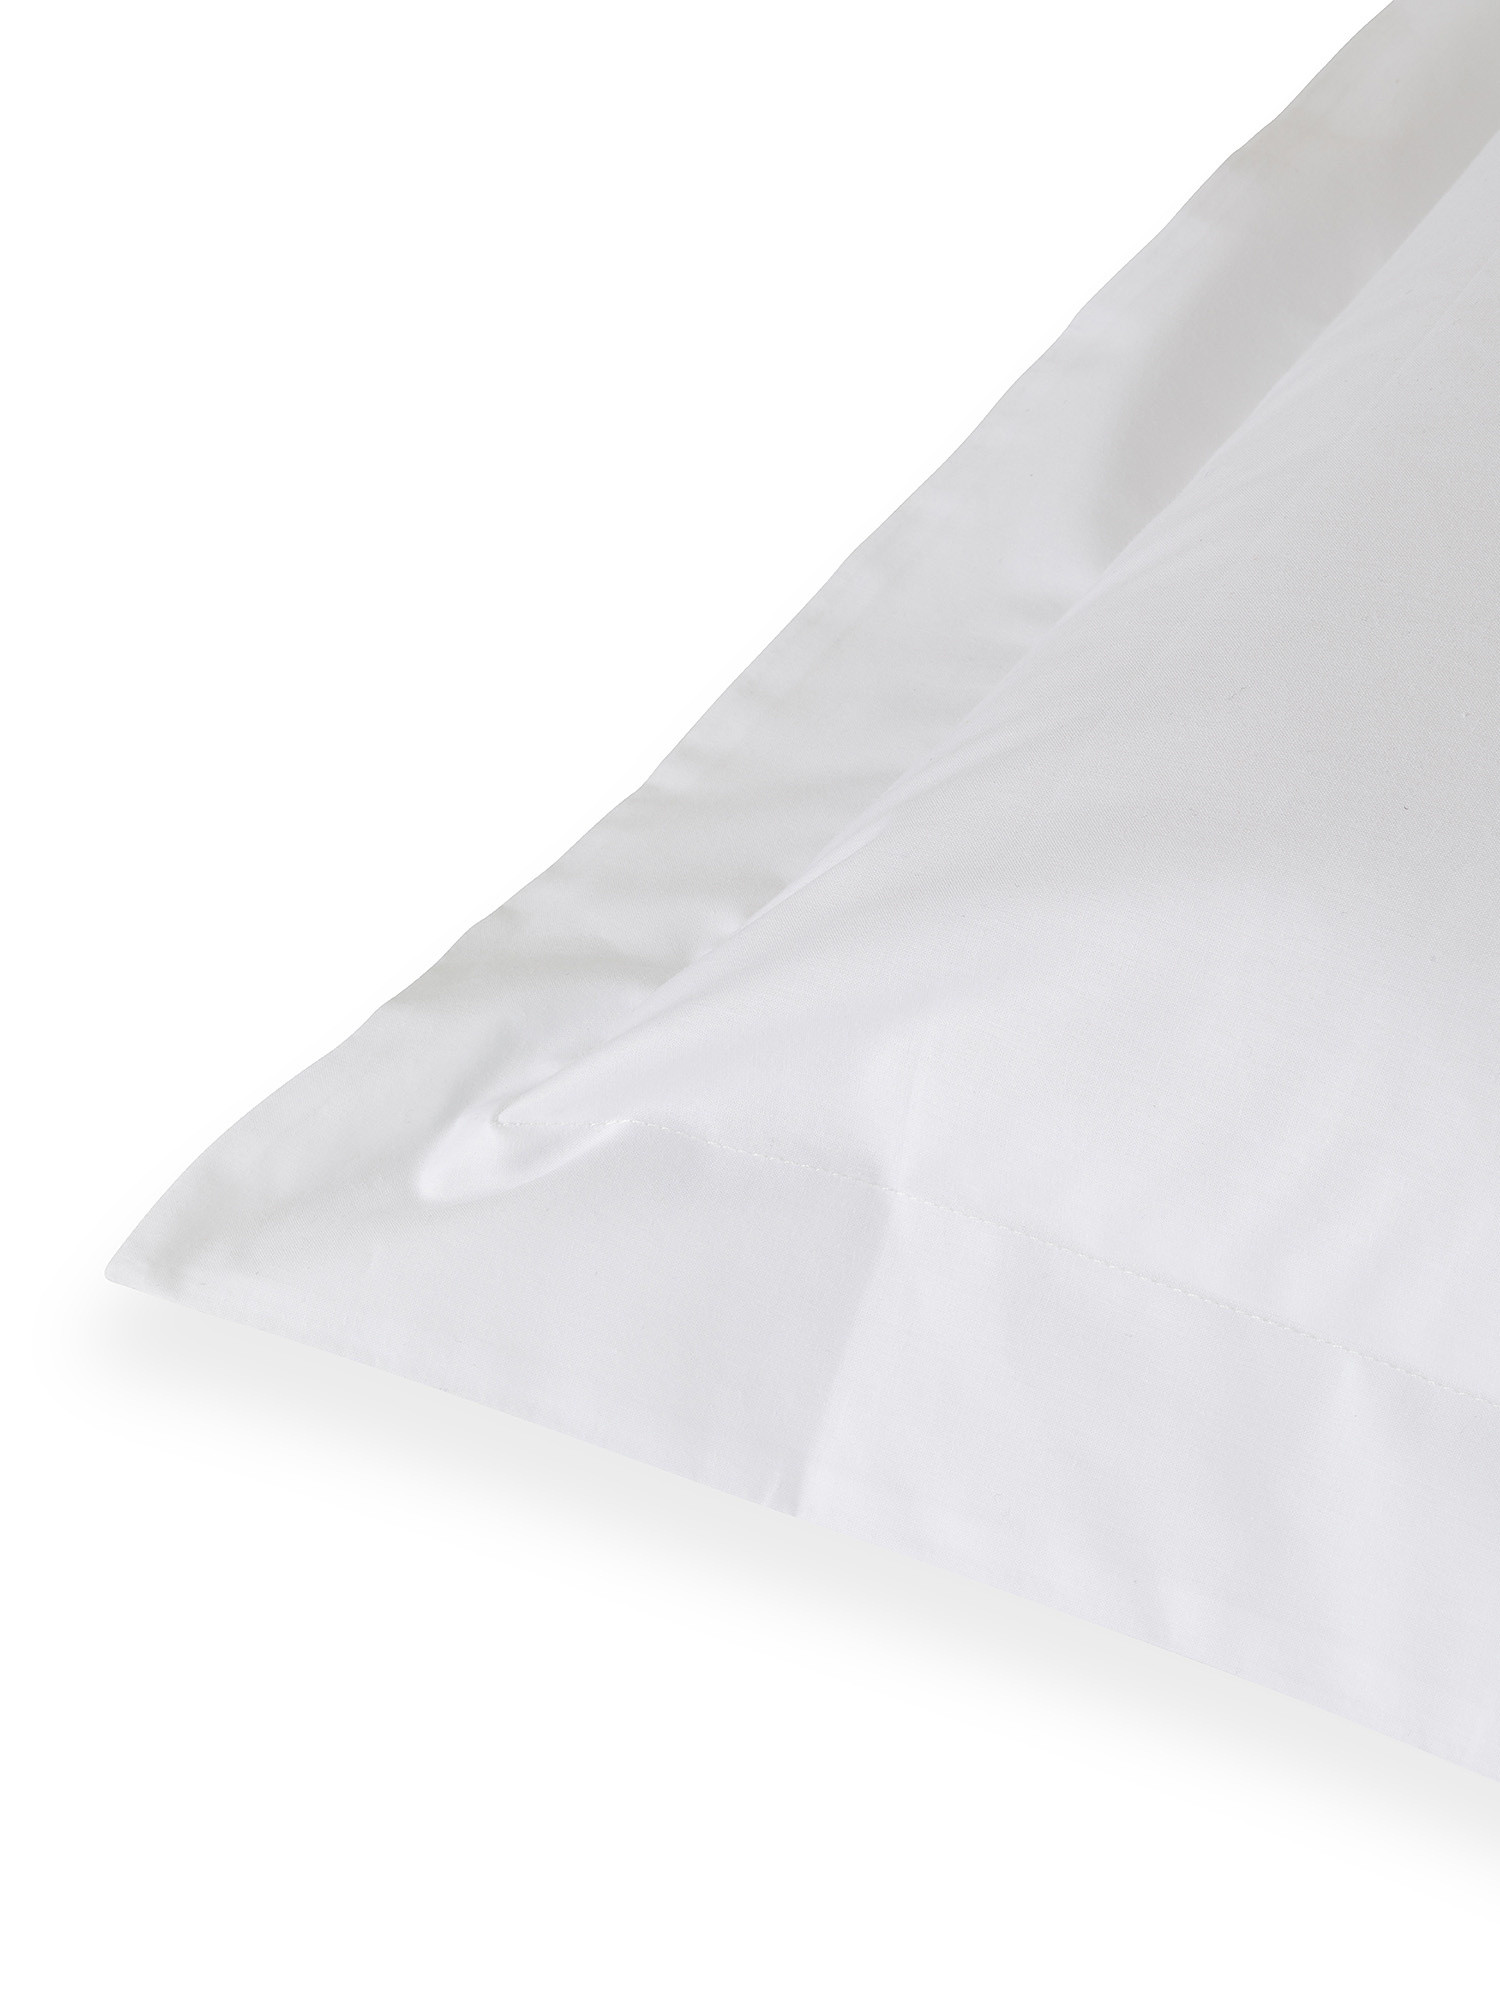 Portofino pillowcase in 100% cotton percale with frill, White, large image number 1